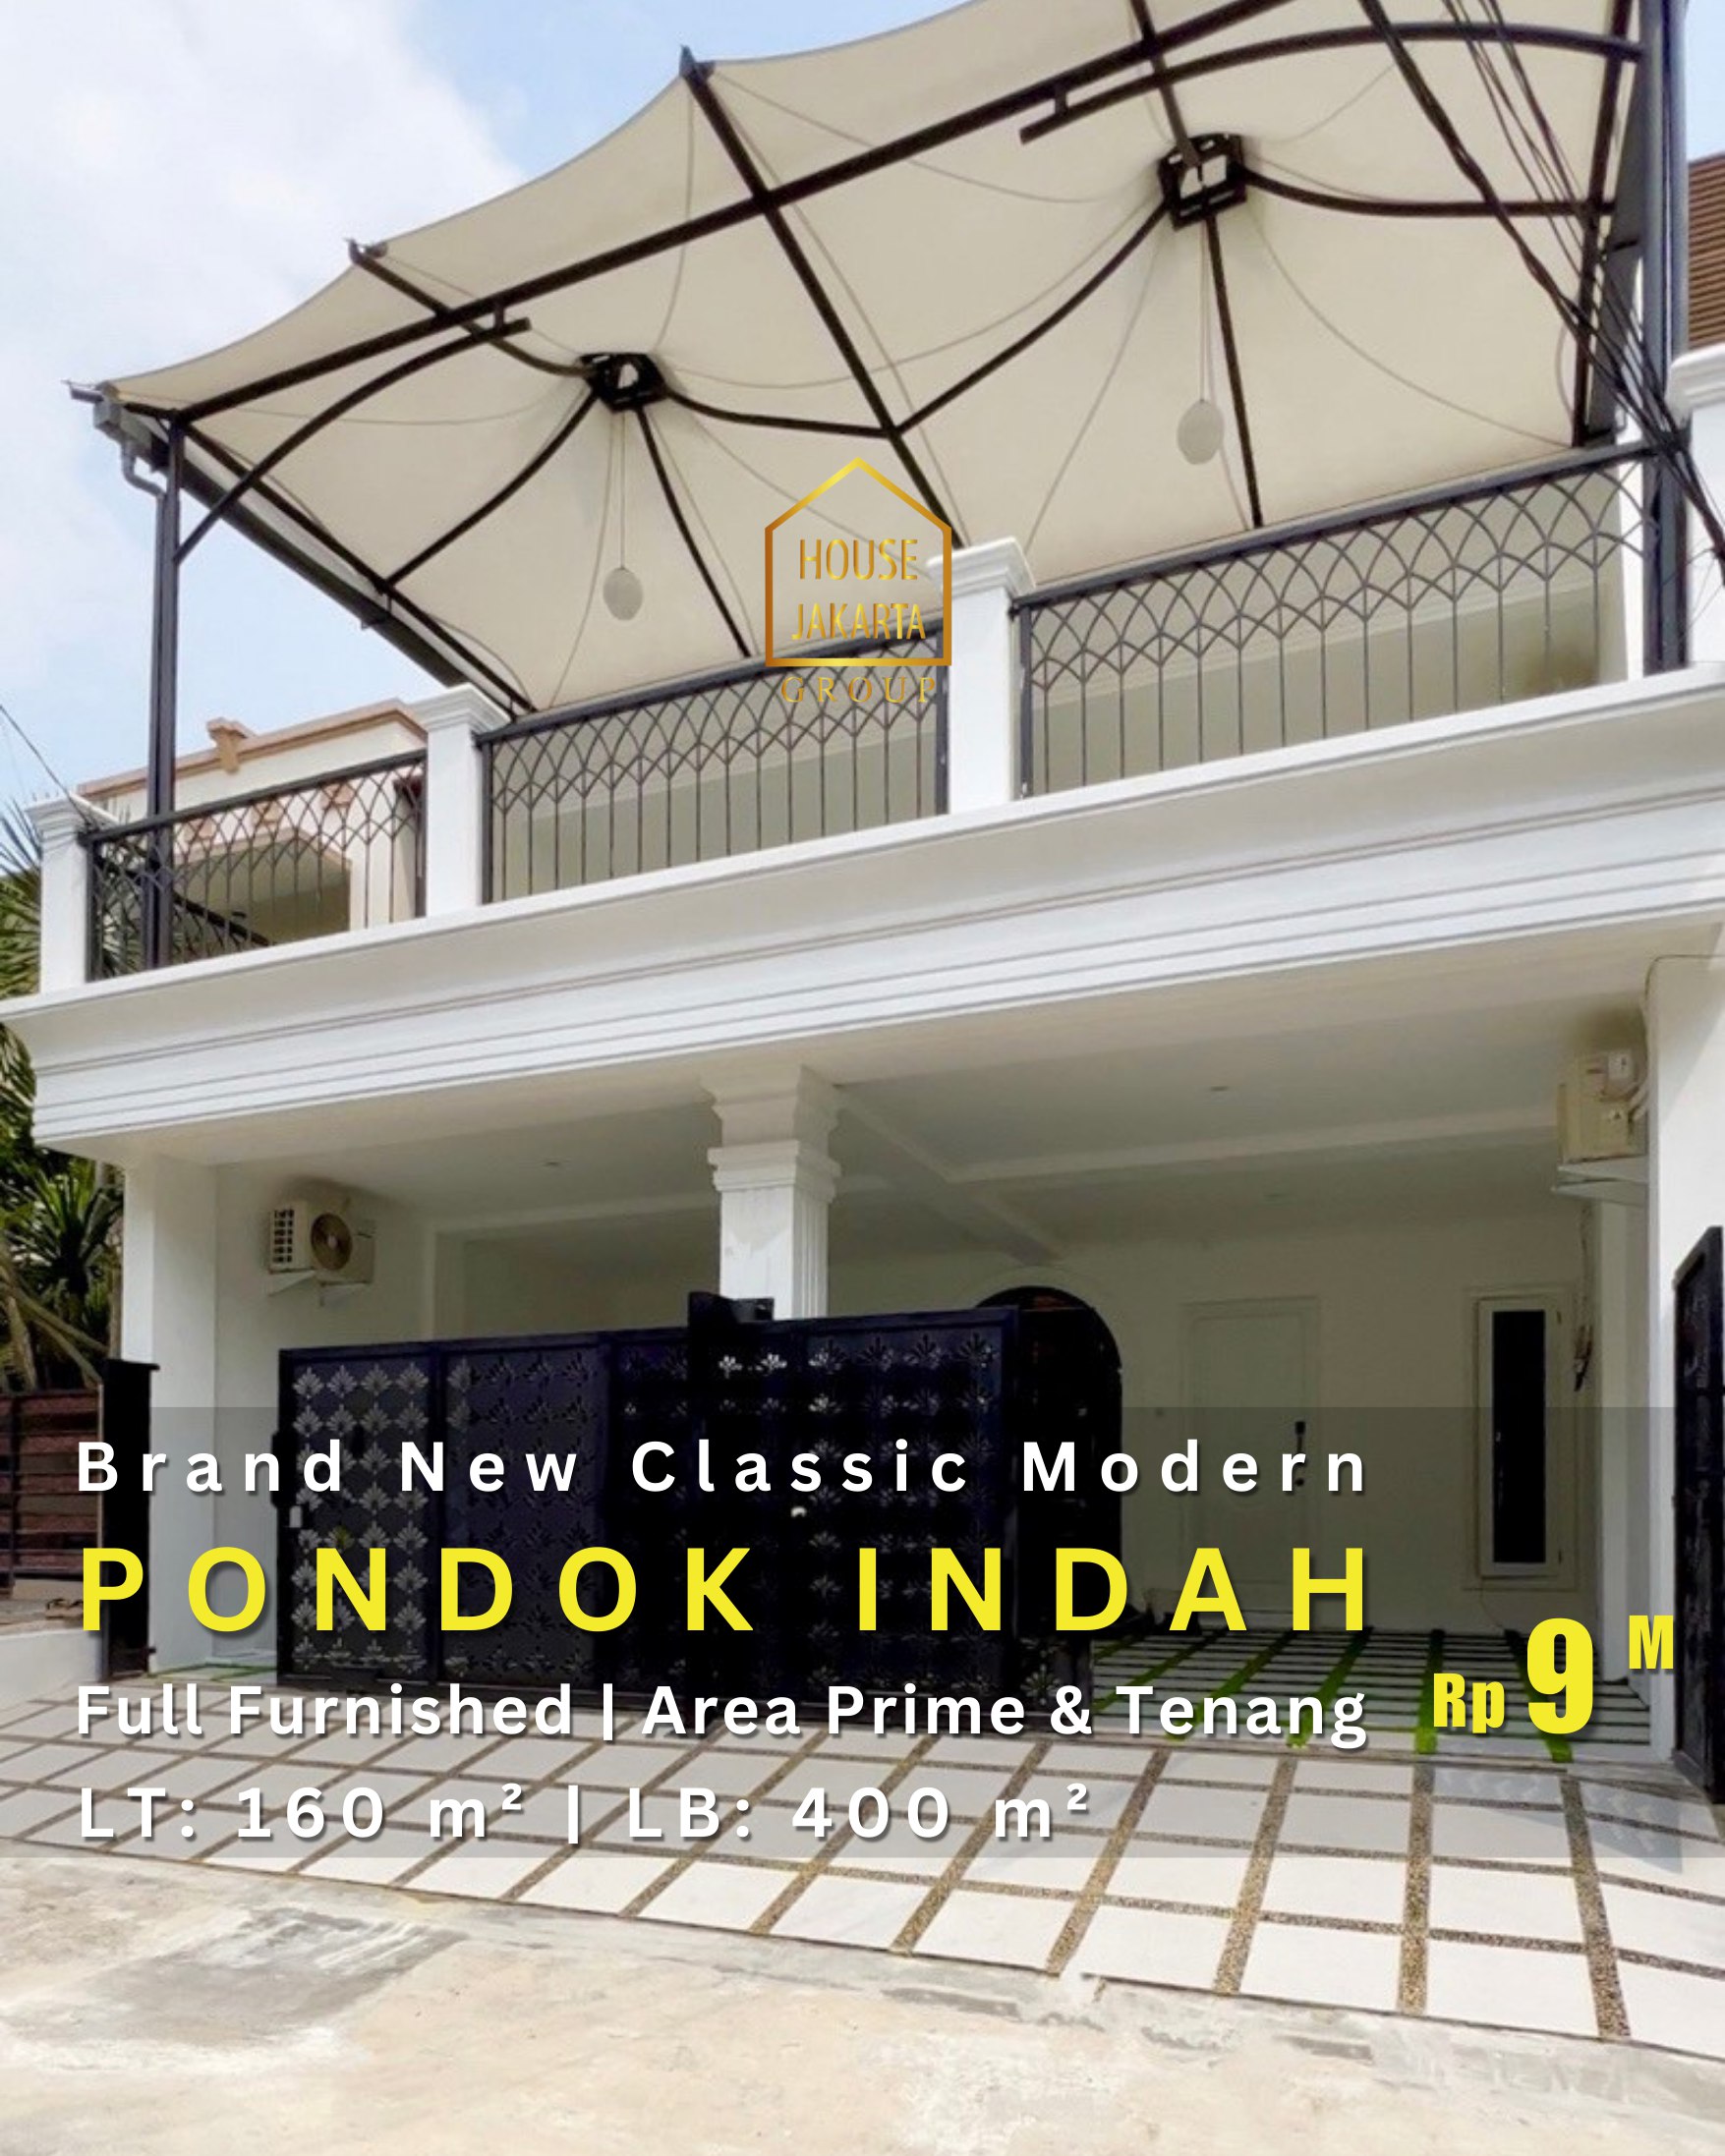  Brand New Modern Classic House Pondok Indah Fully Furnished, Area Prime & Tenang